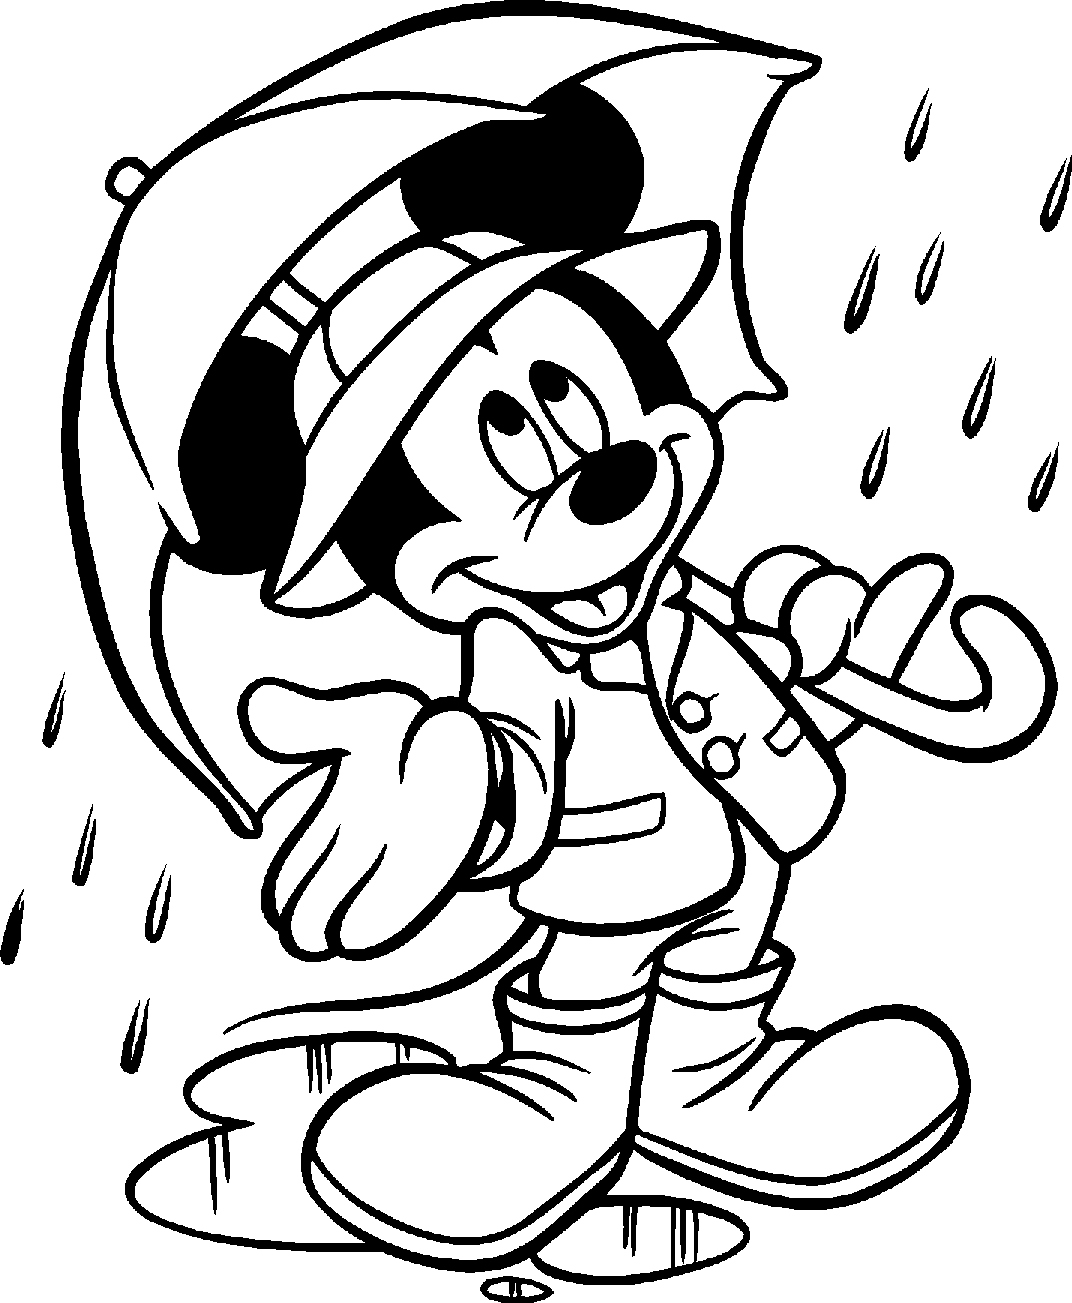 Simple All Cartoon Coloring Pages with simple drawing